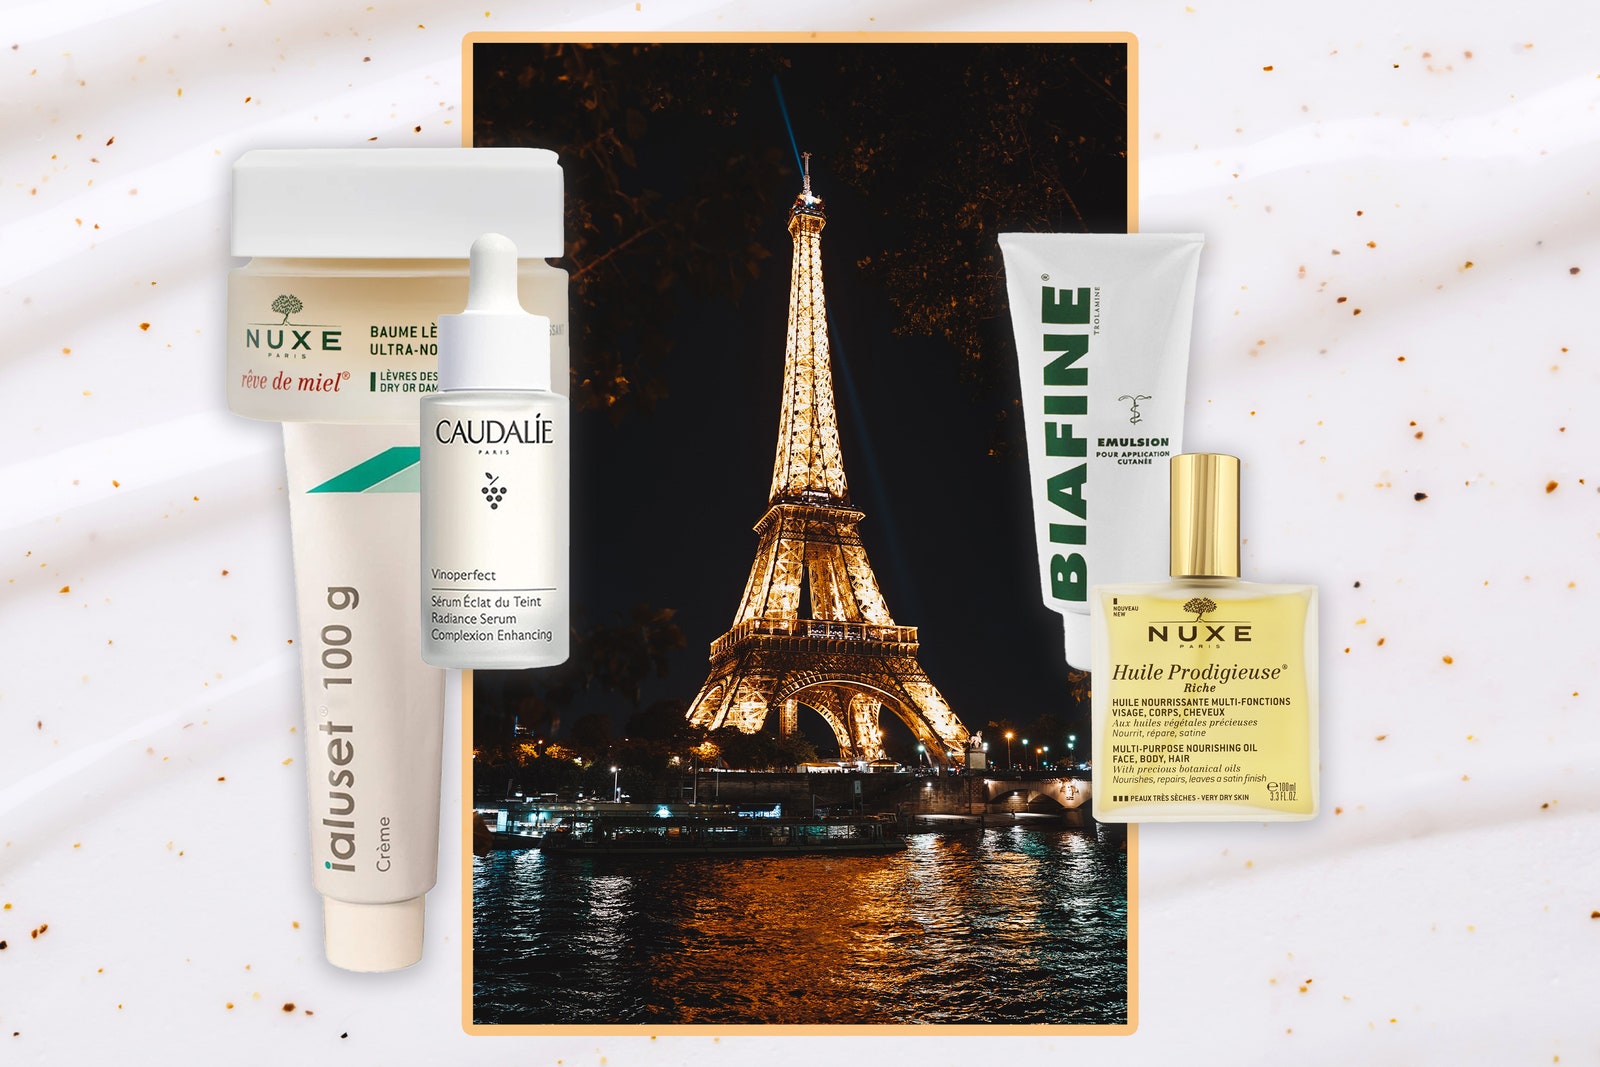 10 Cult-Favorite French Pharmacy Products That Are Worth the Hype